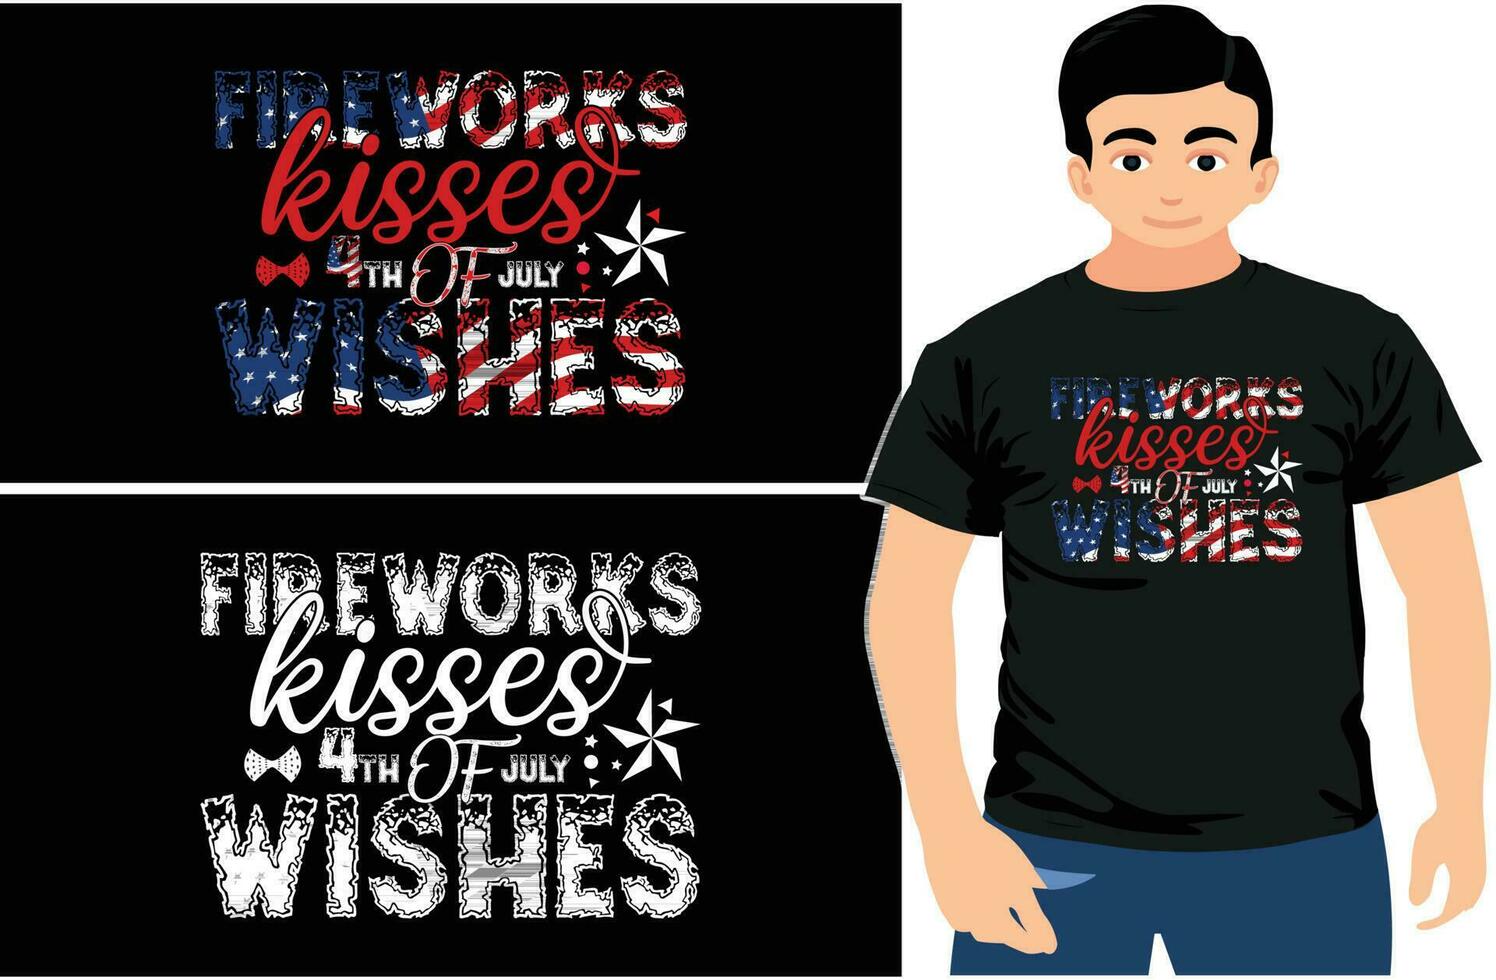 Fireworks Kisses 4th of July Wishes, American Flag With Happy 4th of July Shirt, T-shirt Design. vector